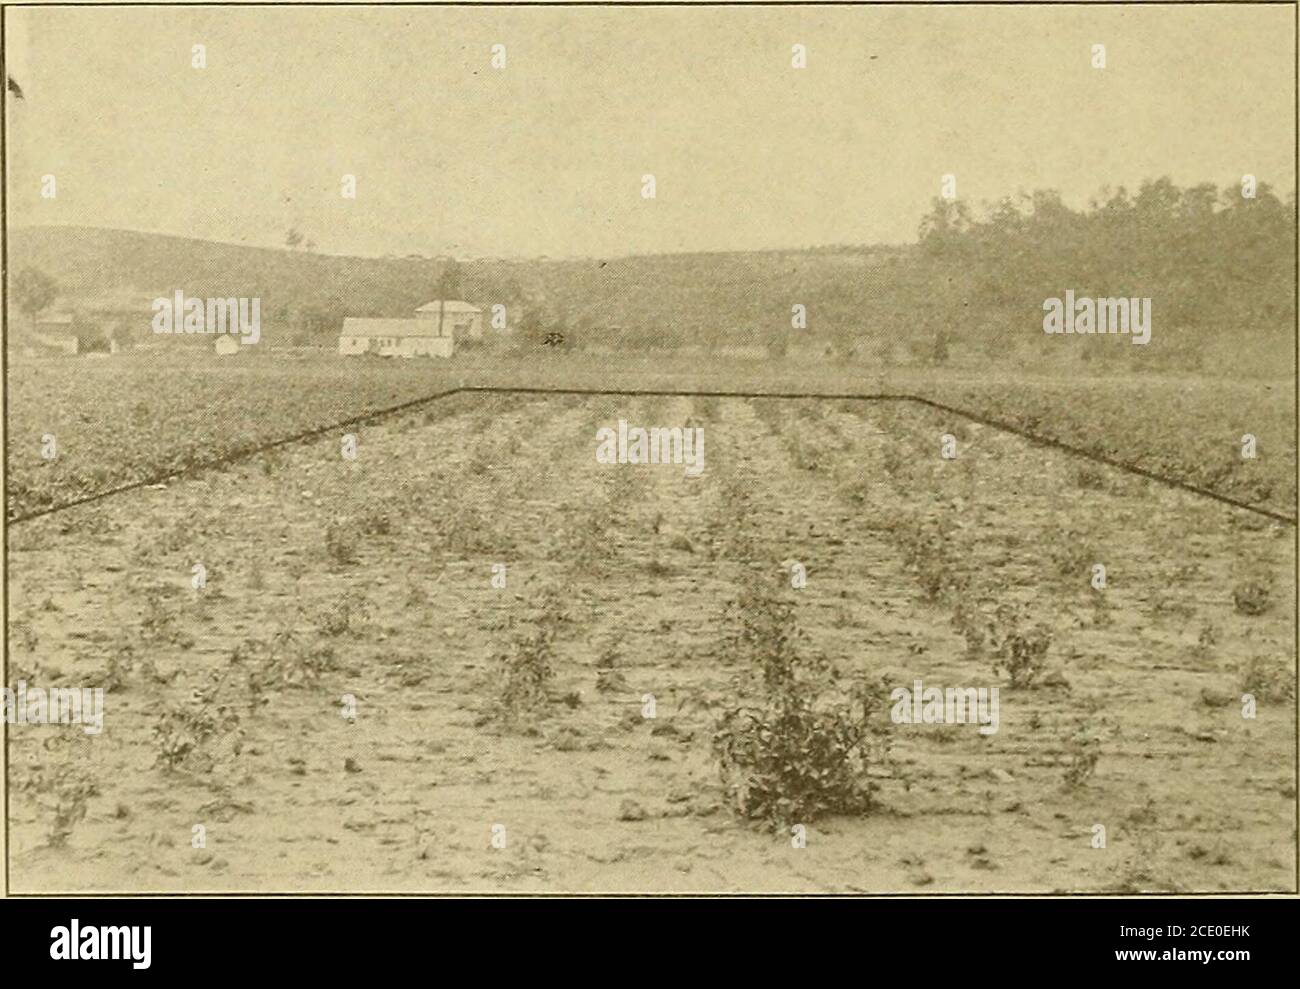 . Fertilizer experiments with tomatoes . 1910 Tests with Messrs. Atkinson and Rockwell. Field No. 1. Mr. Atkinsons Field Mr. Rockwells Field No. 1. No. 1. ea C 05 oa 03 .Son oa Q. O a o 1CL alue Pf IncreDeductif Fert . .ao a -z -L- — o *- a Z— . o j, o o 03 rf E 3 fe 3 ?- 3 - o a &gt; a aH o & c a &gt; » oC o &gt; Ss Z &gt;0- &gt;o z&lt;Q- &gt;o Z&lt;&lt;o £L 5 1260 $3.56 $33.50 850 $1.35 $11.40 $22.45 6 405 52o 7 1282.5 3.65 28.30 855 1.37 5.50 16.90 8 1320 3.81 31.20 980 1.89 12.00 21.60 9 1687 5.34 47.30 790 1.10 4.90 26.10 10 870 1.93 10.50 590 .27 * 8.53 .98 11 1890 6.18 50.90 1310 3.27 2 Stock Photo